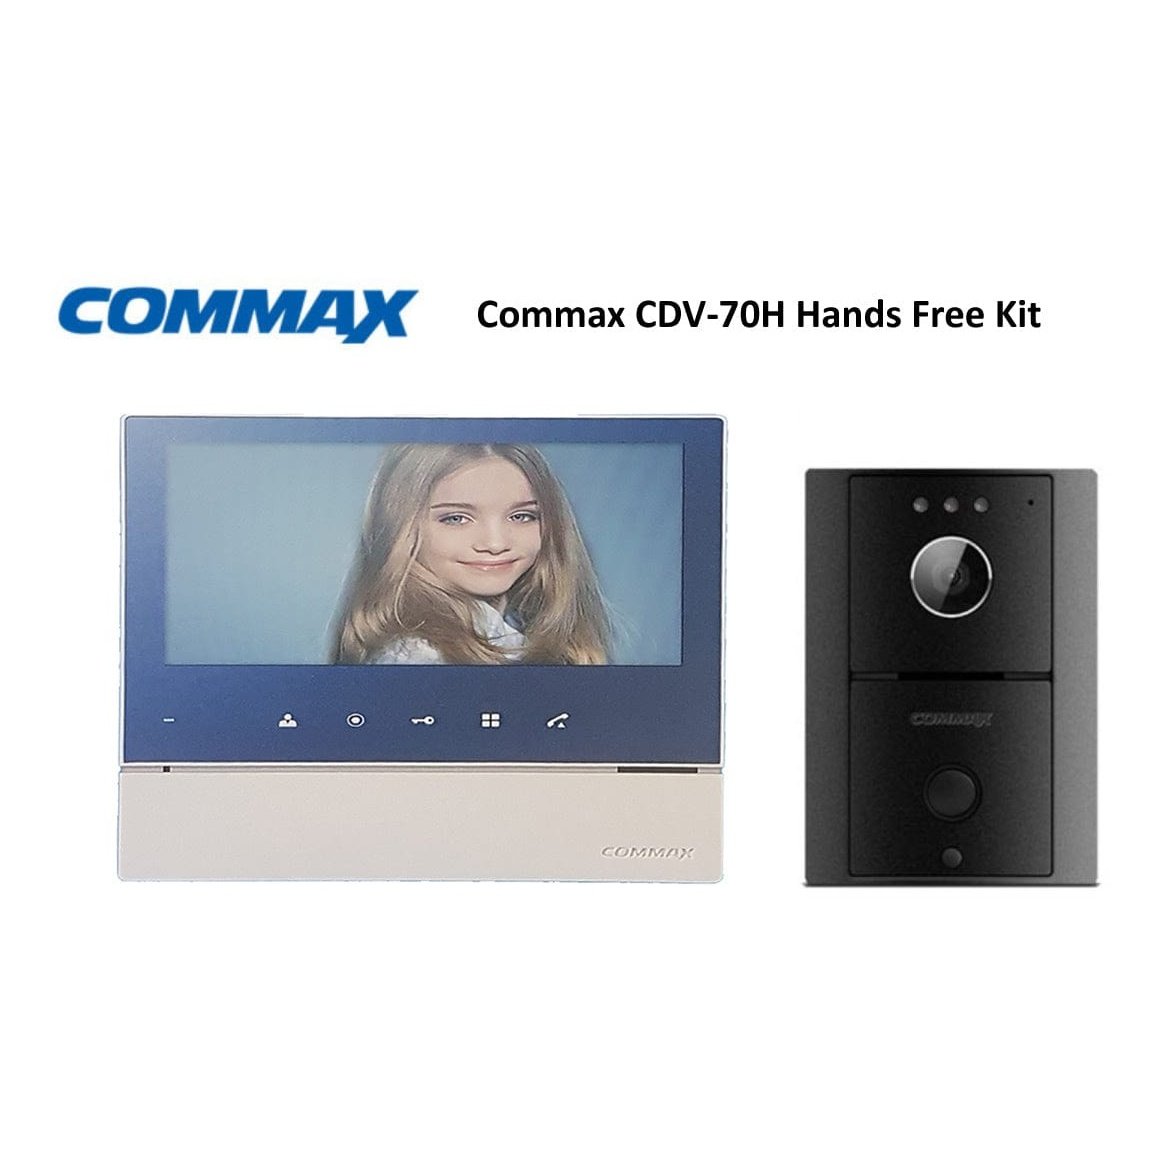 Commax Hands Free 7" Video Touch Button Intercom Kit - CDV-70H/DRC-4L | Supply Master | Accra, Ghana Doorbell & Accessories Buy Tools hardware Building materials